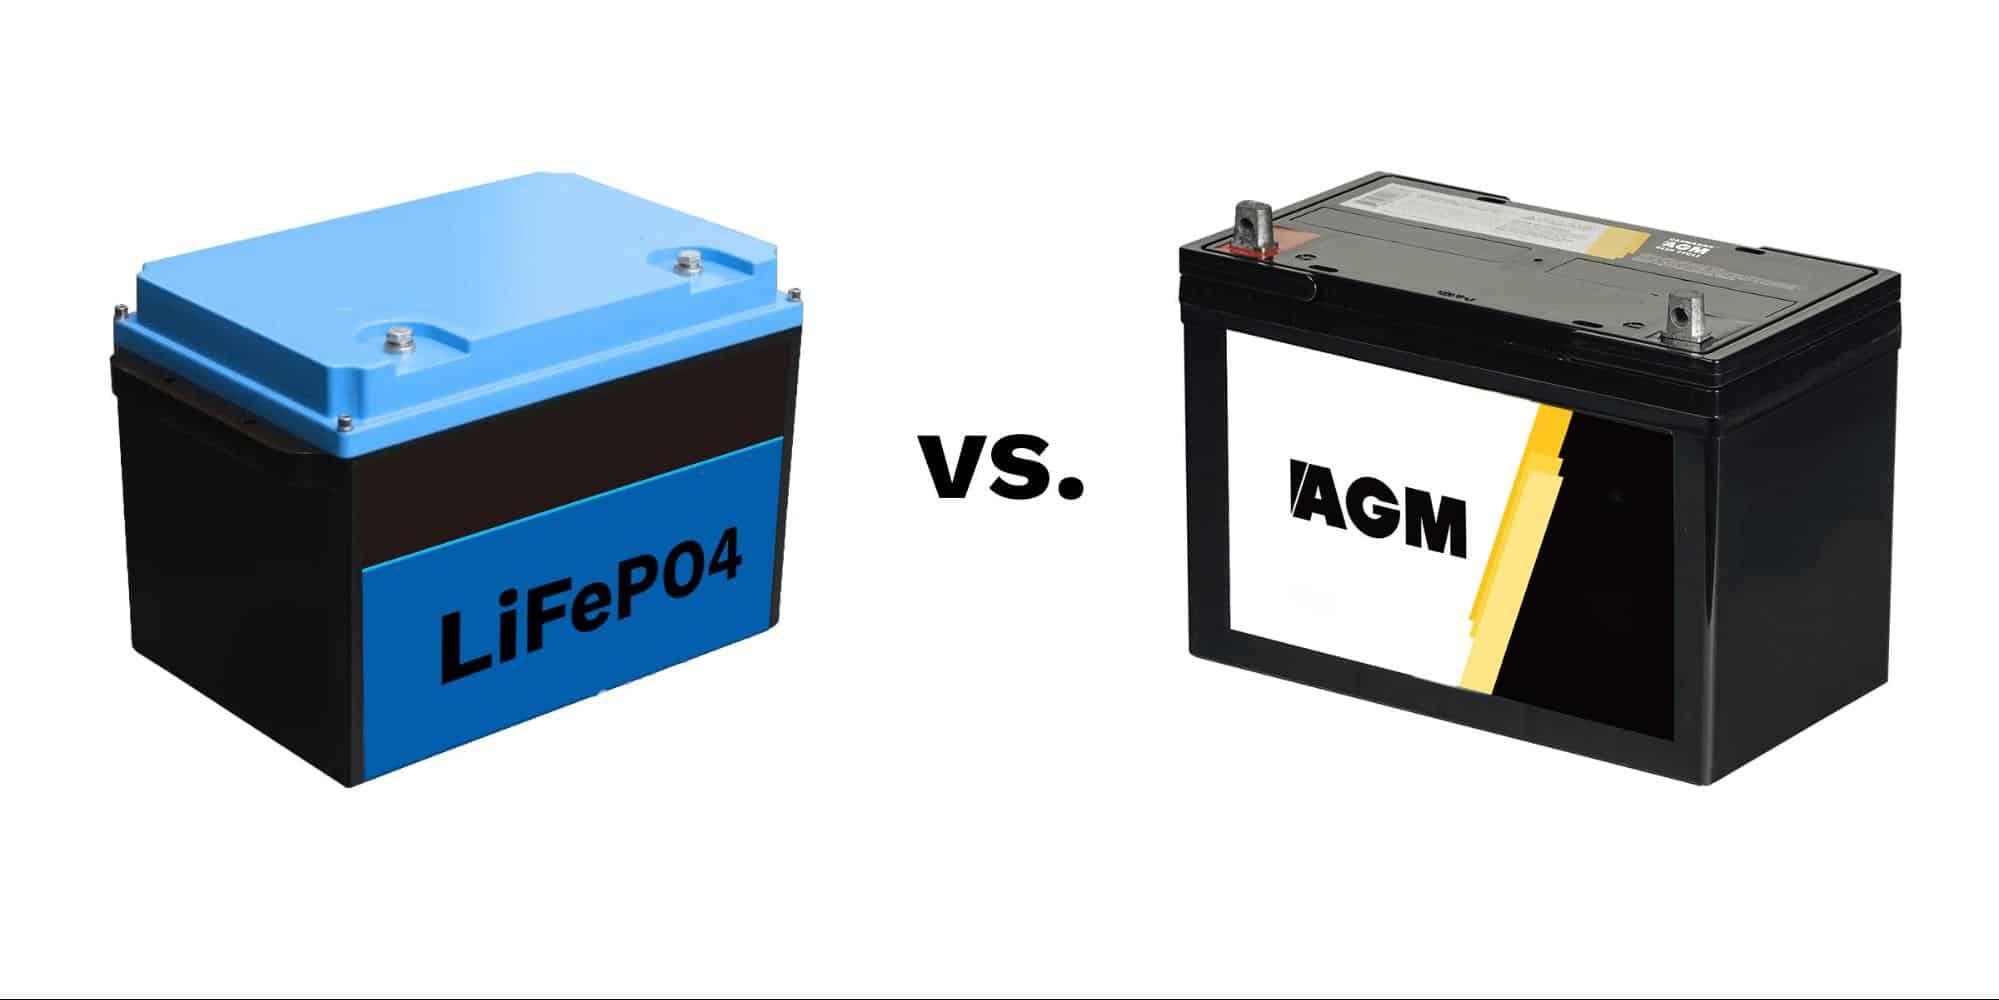 Image differentiating LiFePO4 battery and AGM battery